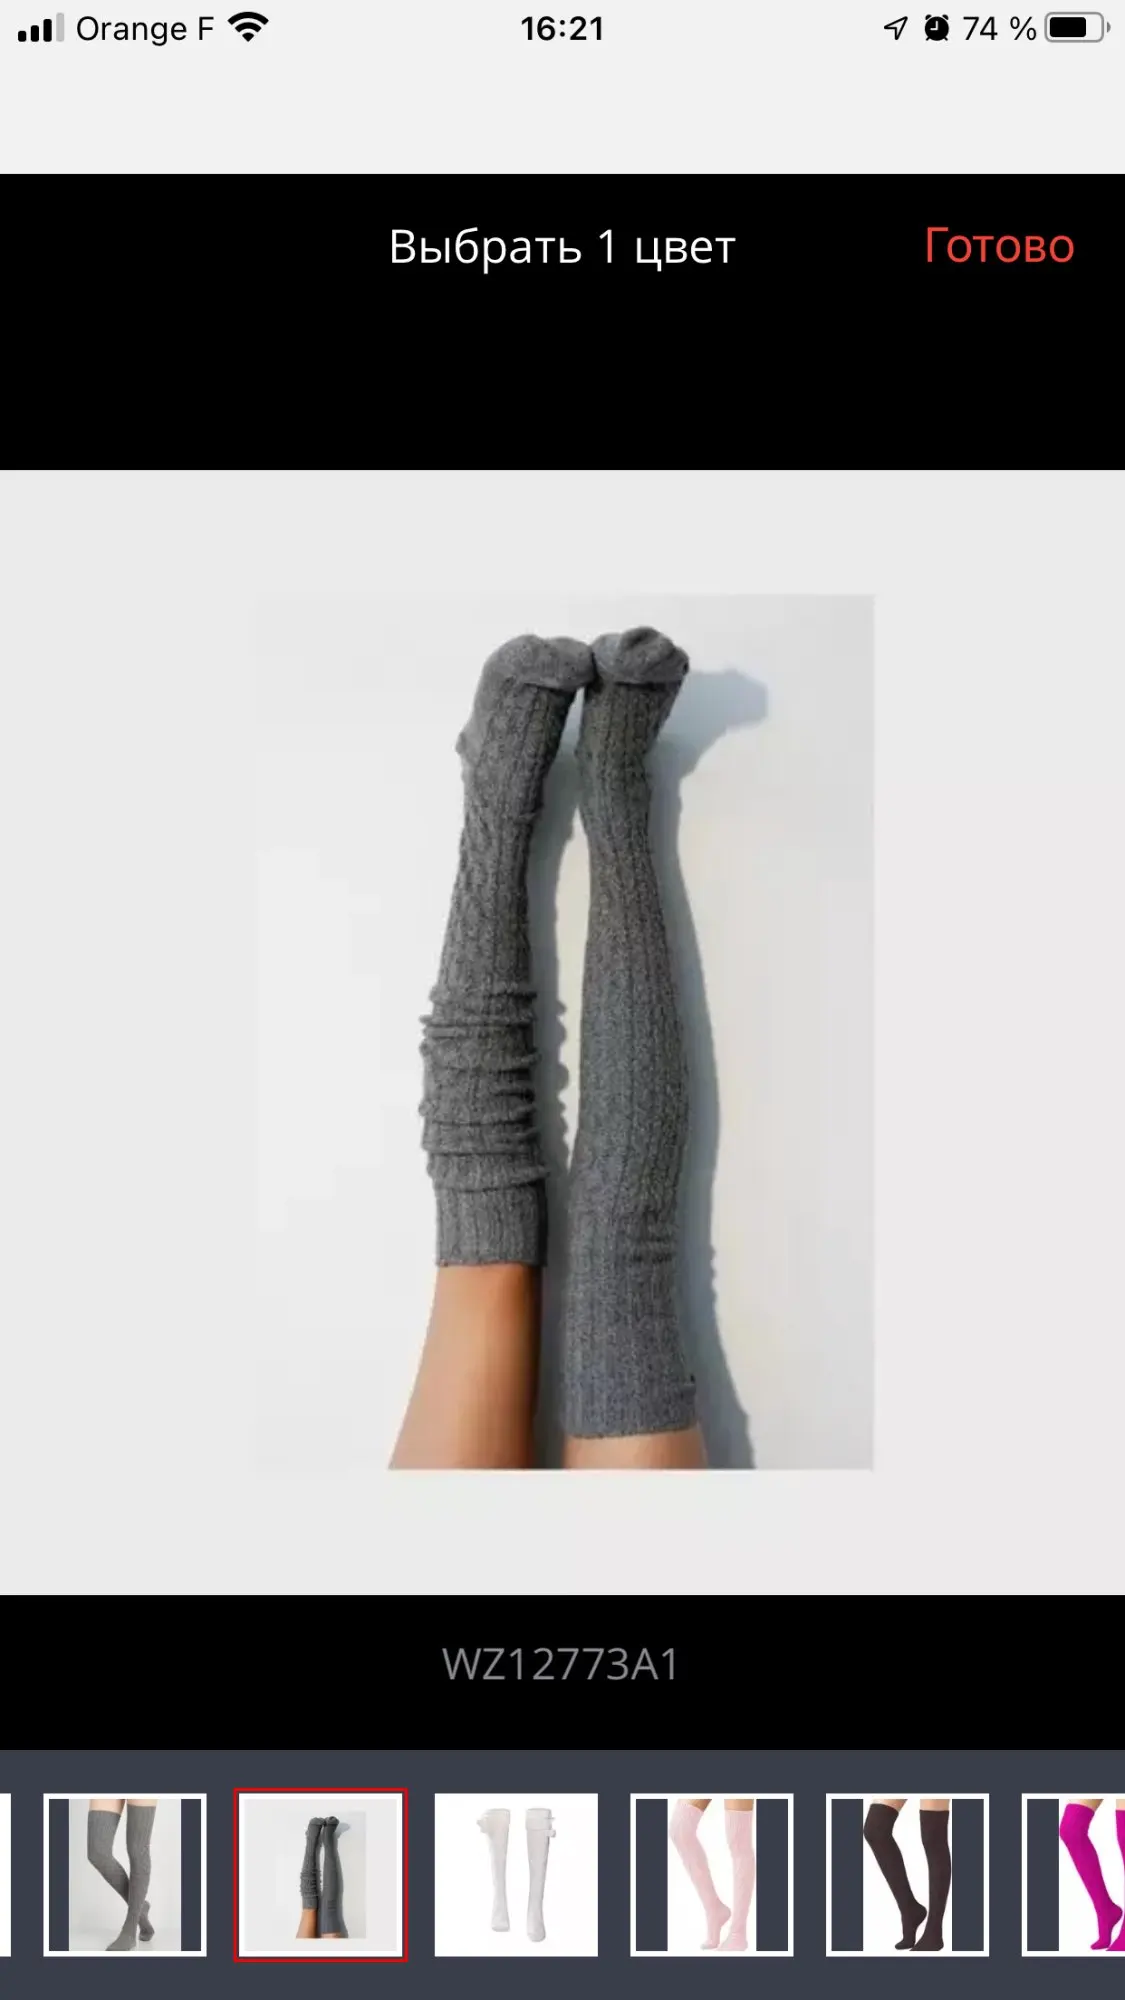 Women Cable Knit Extra Long Boot Socking Over Knee Thigh High Girls Warm Stock Autumn And Winter Ladies Fashion Items|Stockings|   - AliExpress